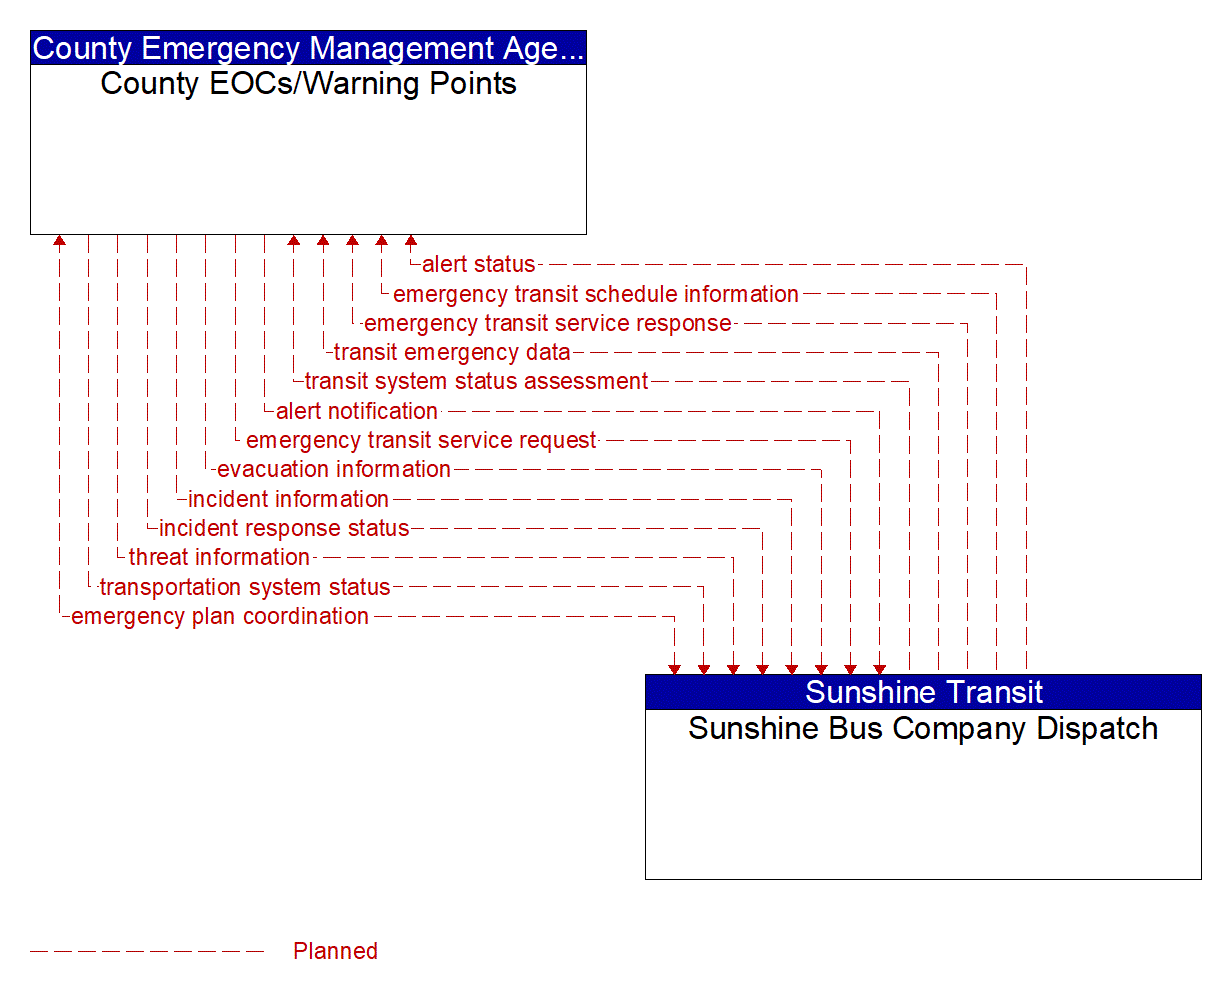 Architecture Flow Diagram: Sunshine Bus Company Dispatch <--> County EOCs/Warning Points